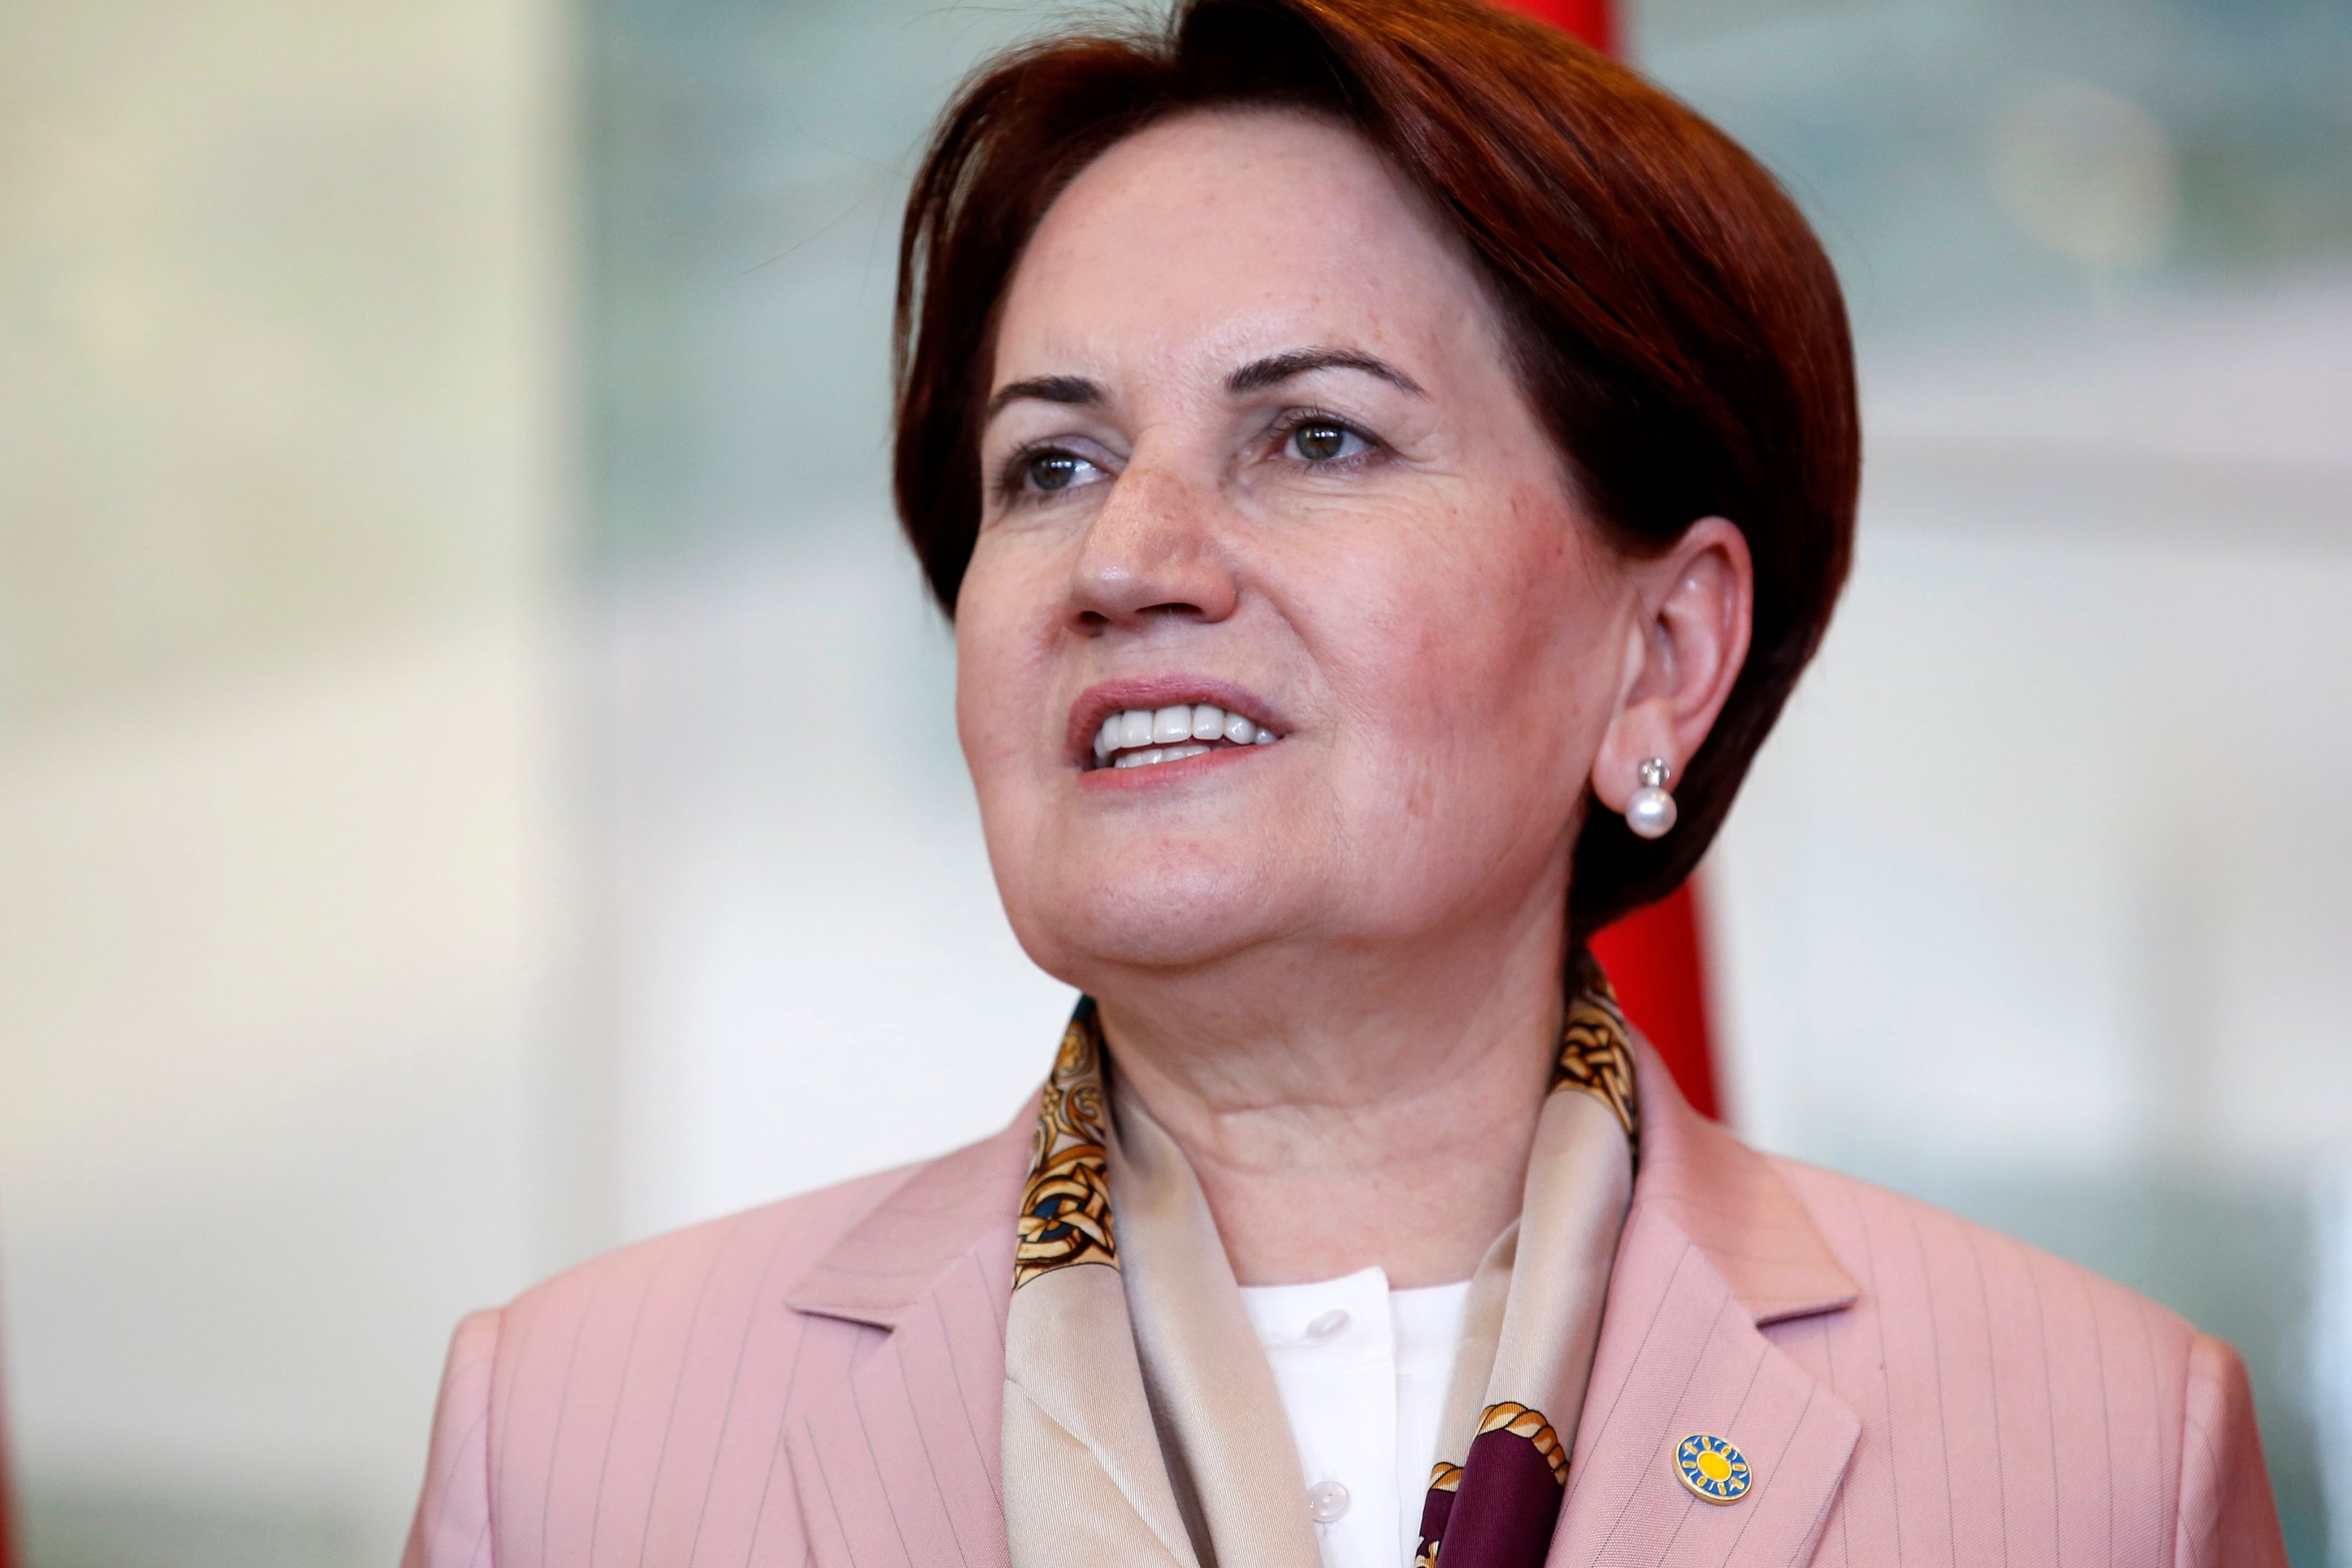 Republican People's Party (CHP) head Kemal Kılıçdaroğlu (not pictured) and Good Party (IP) head Meral Akşener discussed possible alliance formulas before the presidential election in Ankara, Turkey, April 25, 2018. (Shutterstock Photo)